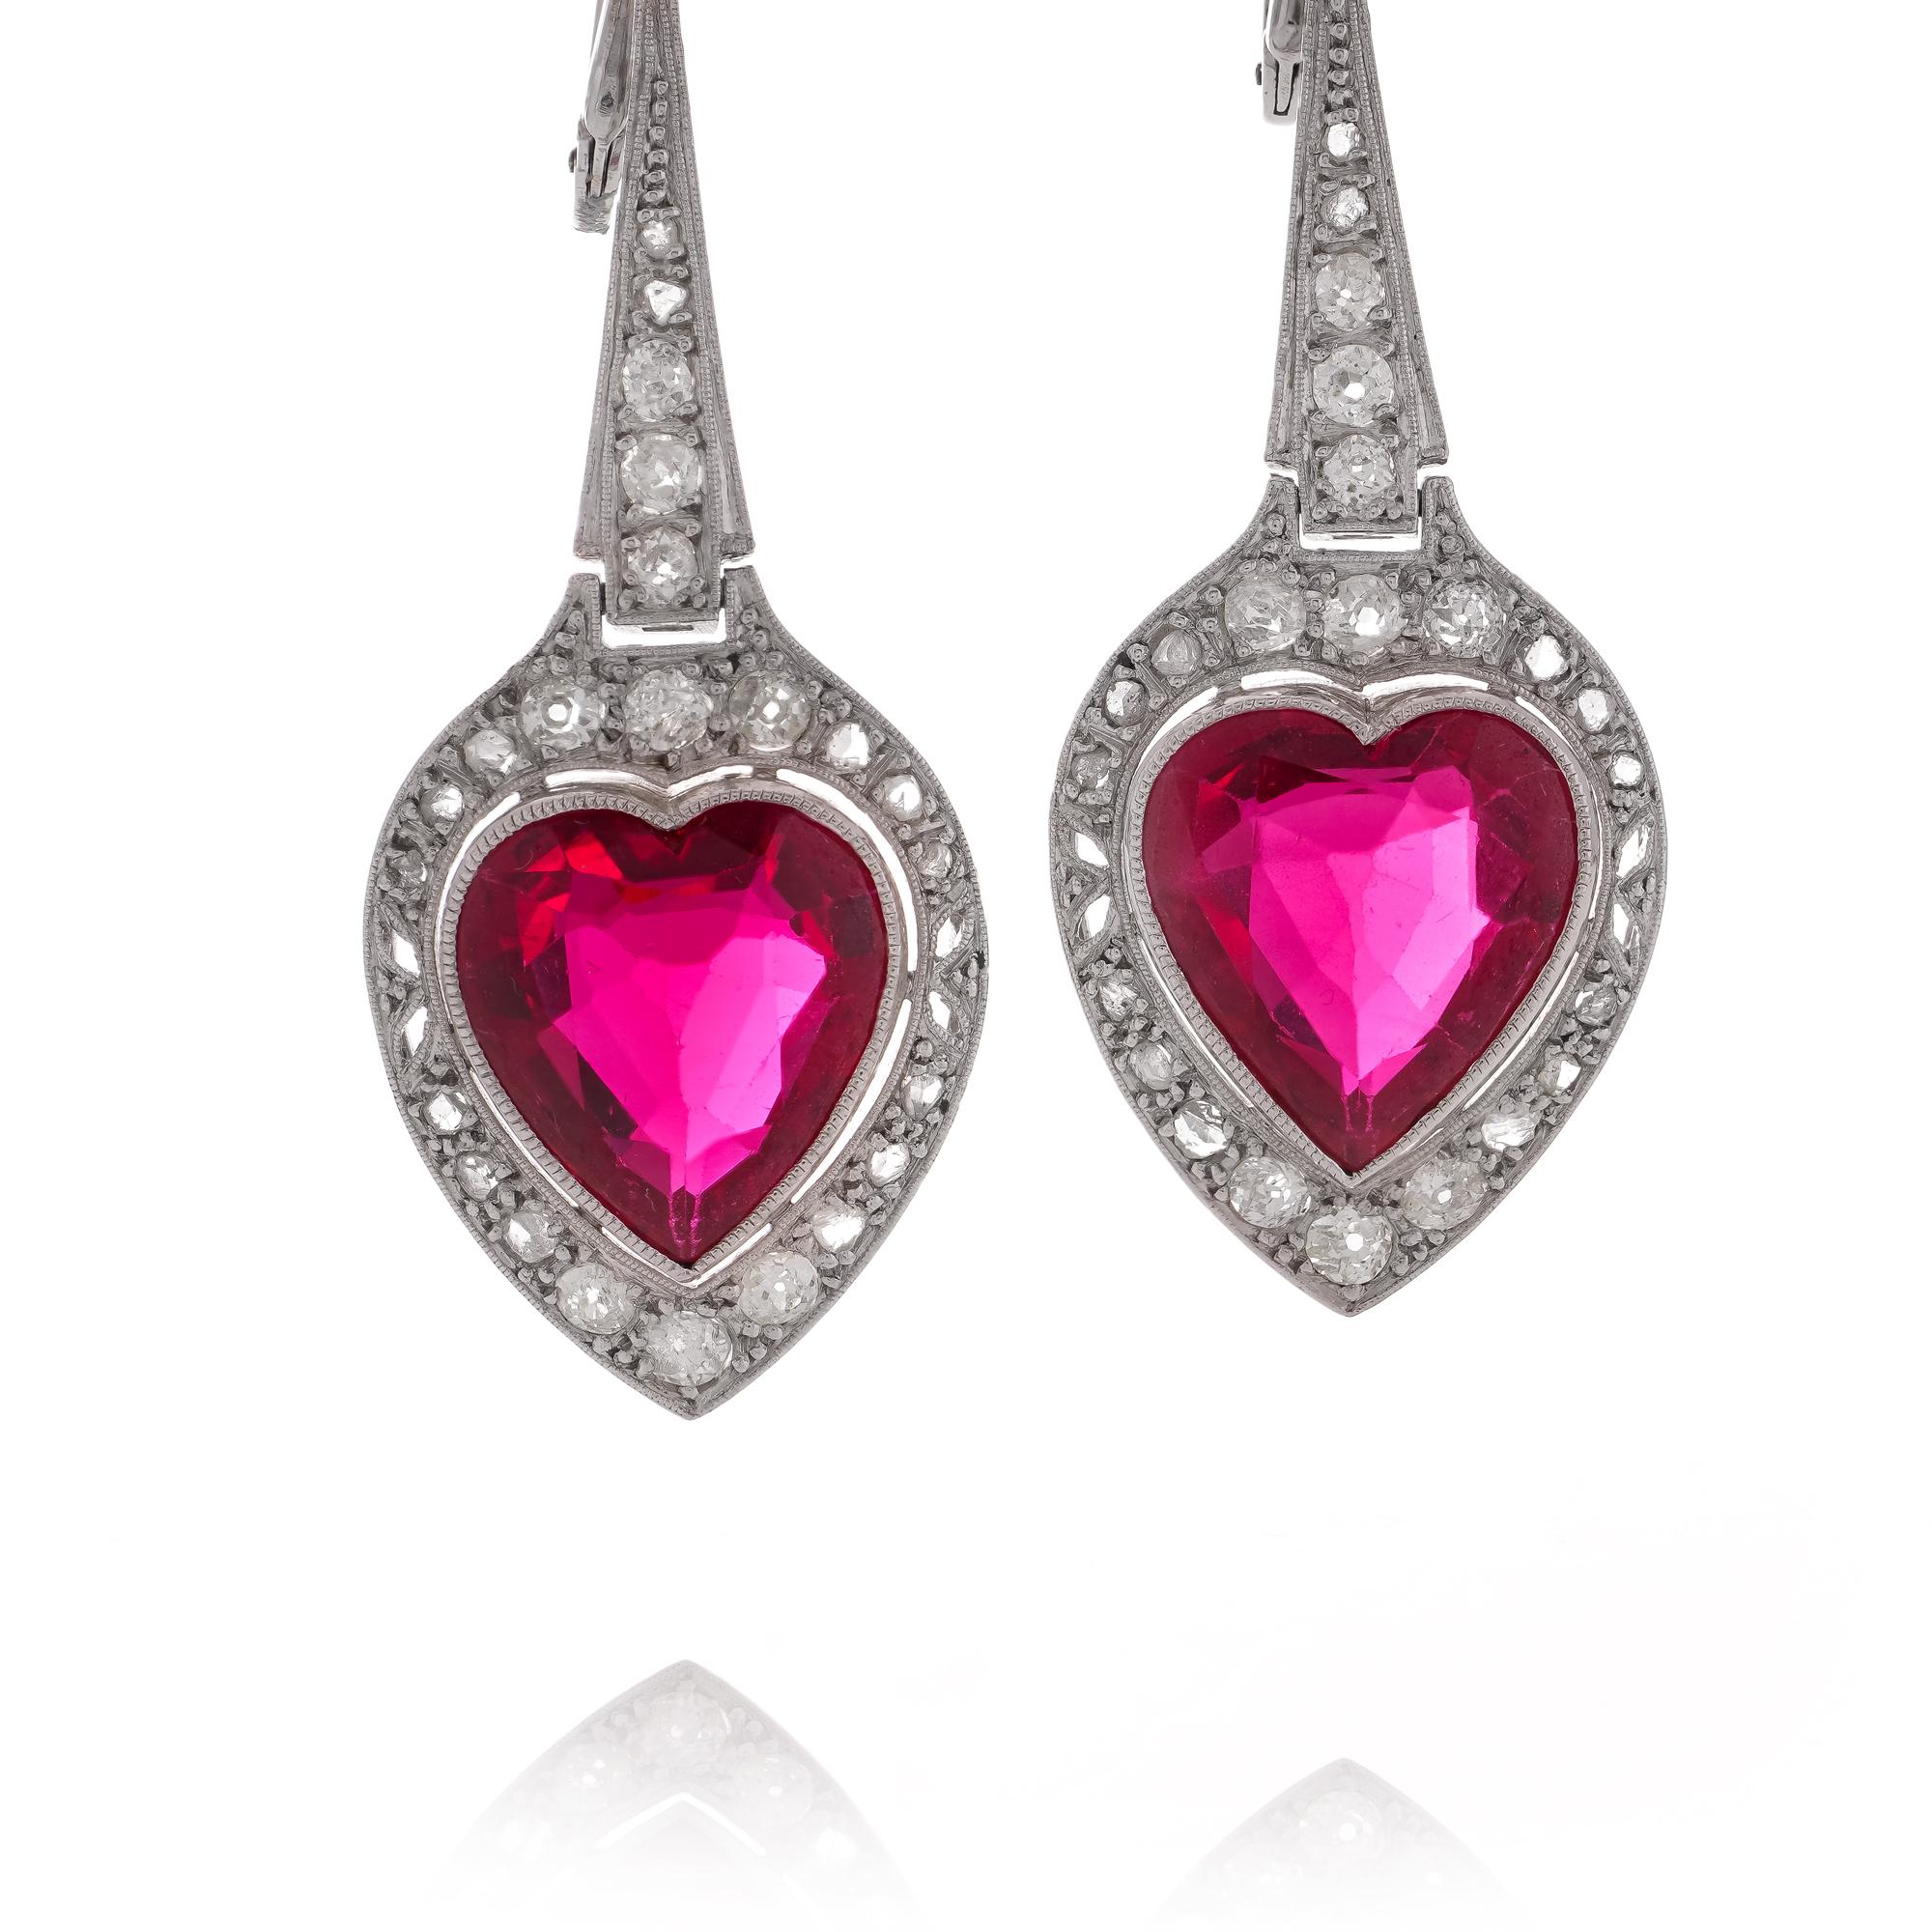 Art Deco-inspired platinum pair of heart-shaped rubies, old European and single cut - diamond earrings.
X-Ray has been tested positive for Platinum.

Dimensions -
Weight: 13.00 grams
Size: length x width: 4.8 x 1.8 cm

Diamonds -
Cut: Single-cut and